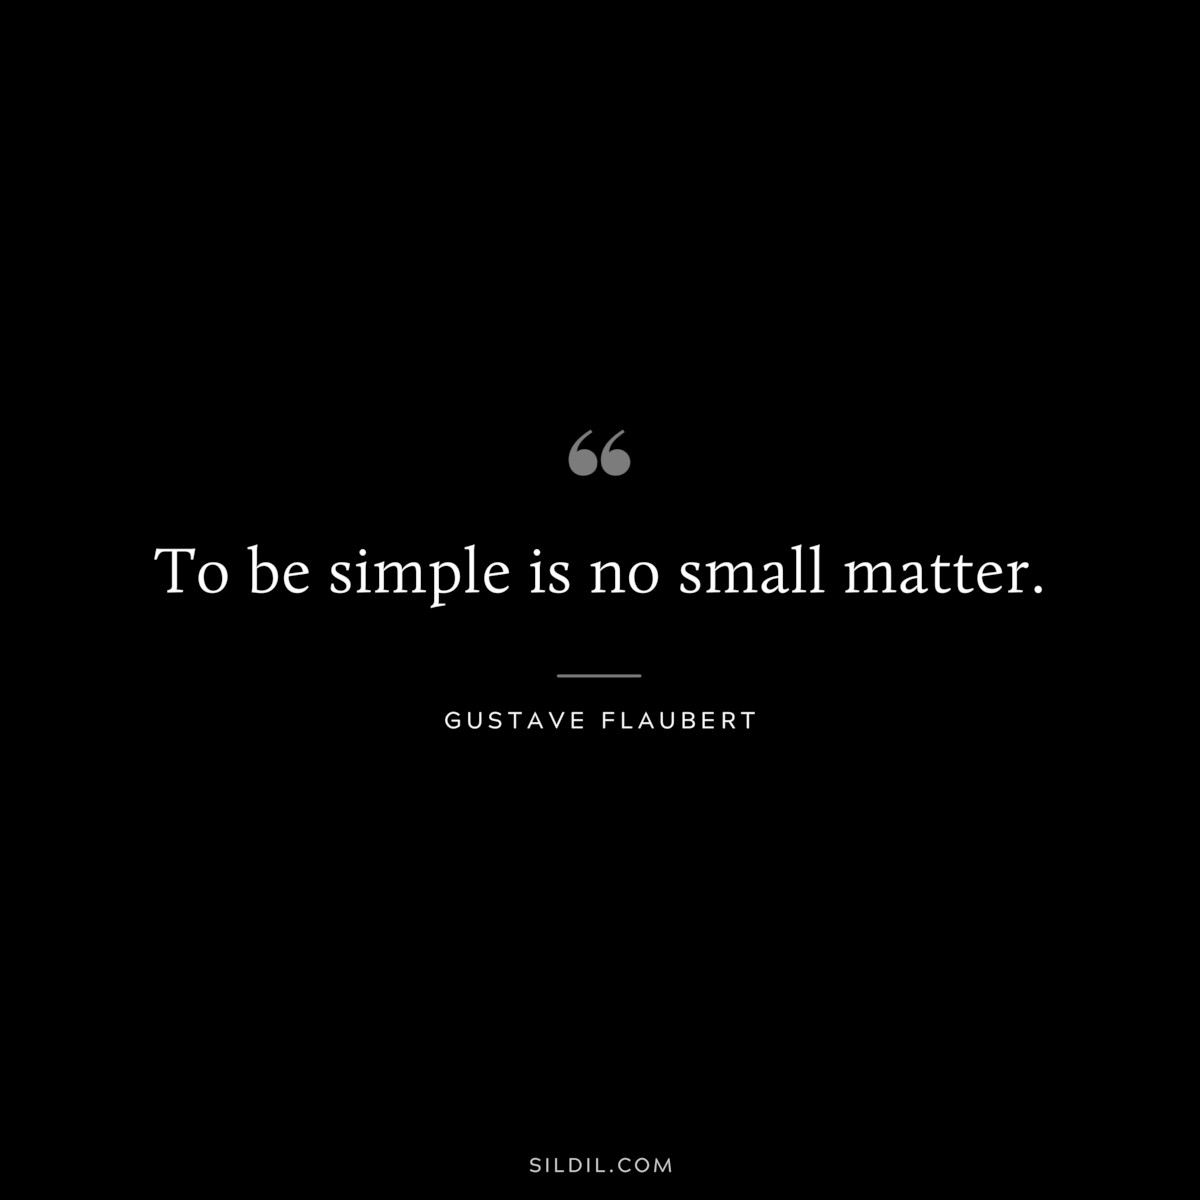 To be simple is no small matter. ― Gustave Flaubert